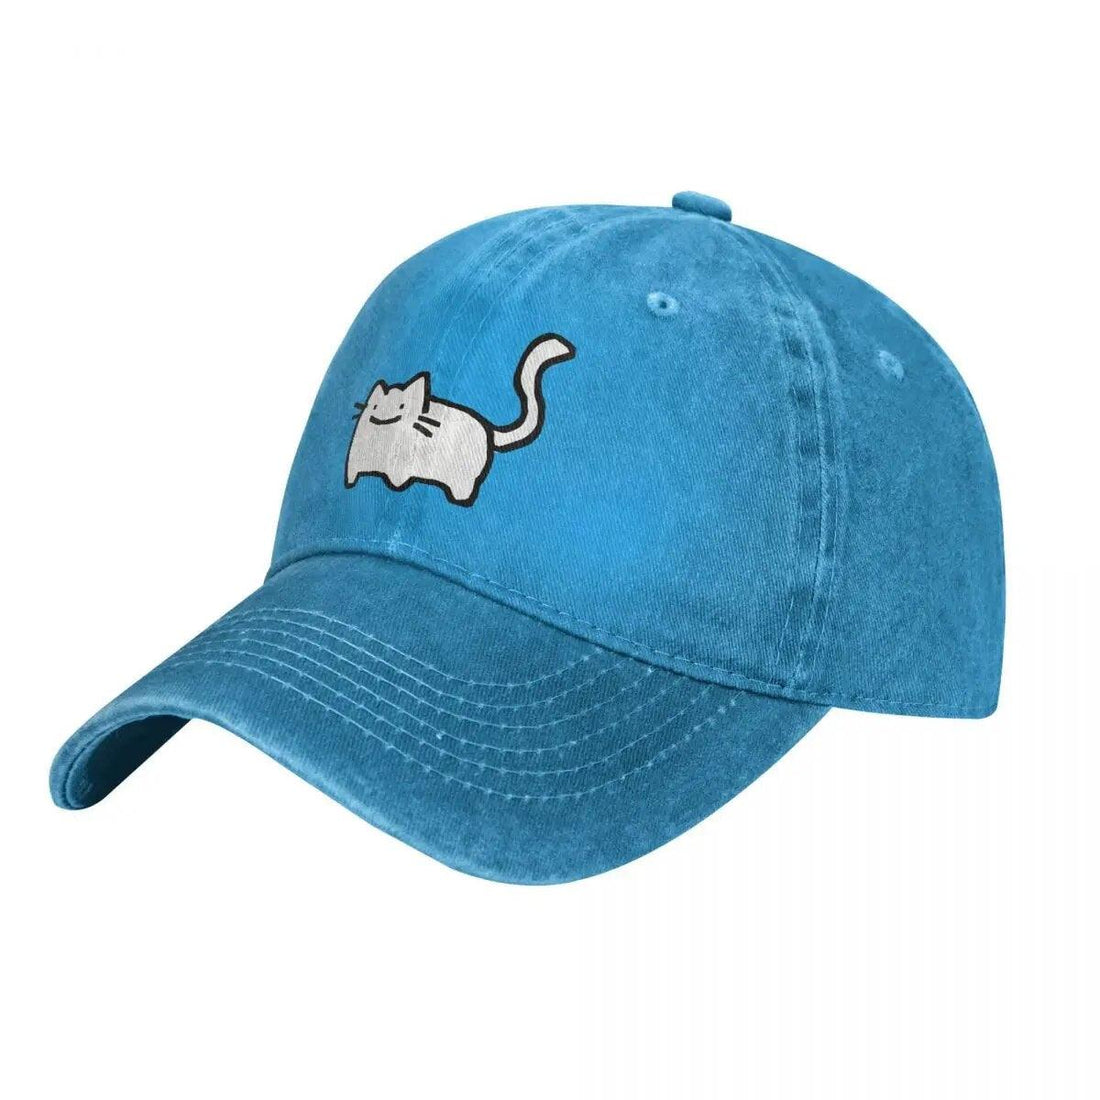 White Cat Baseball Cap, 7 colors - Just Cats - Gifts for Cat Lovers